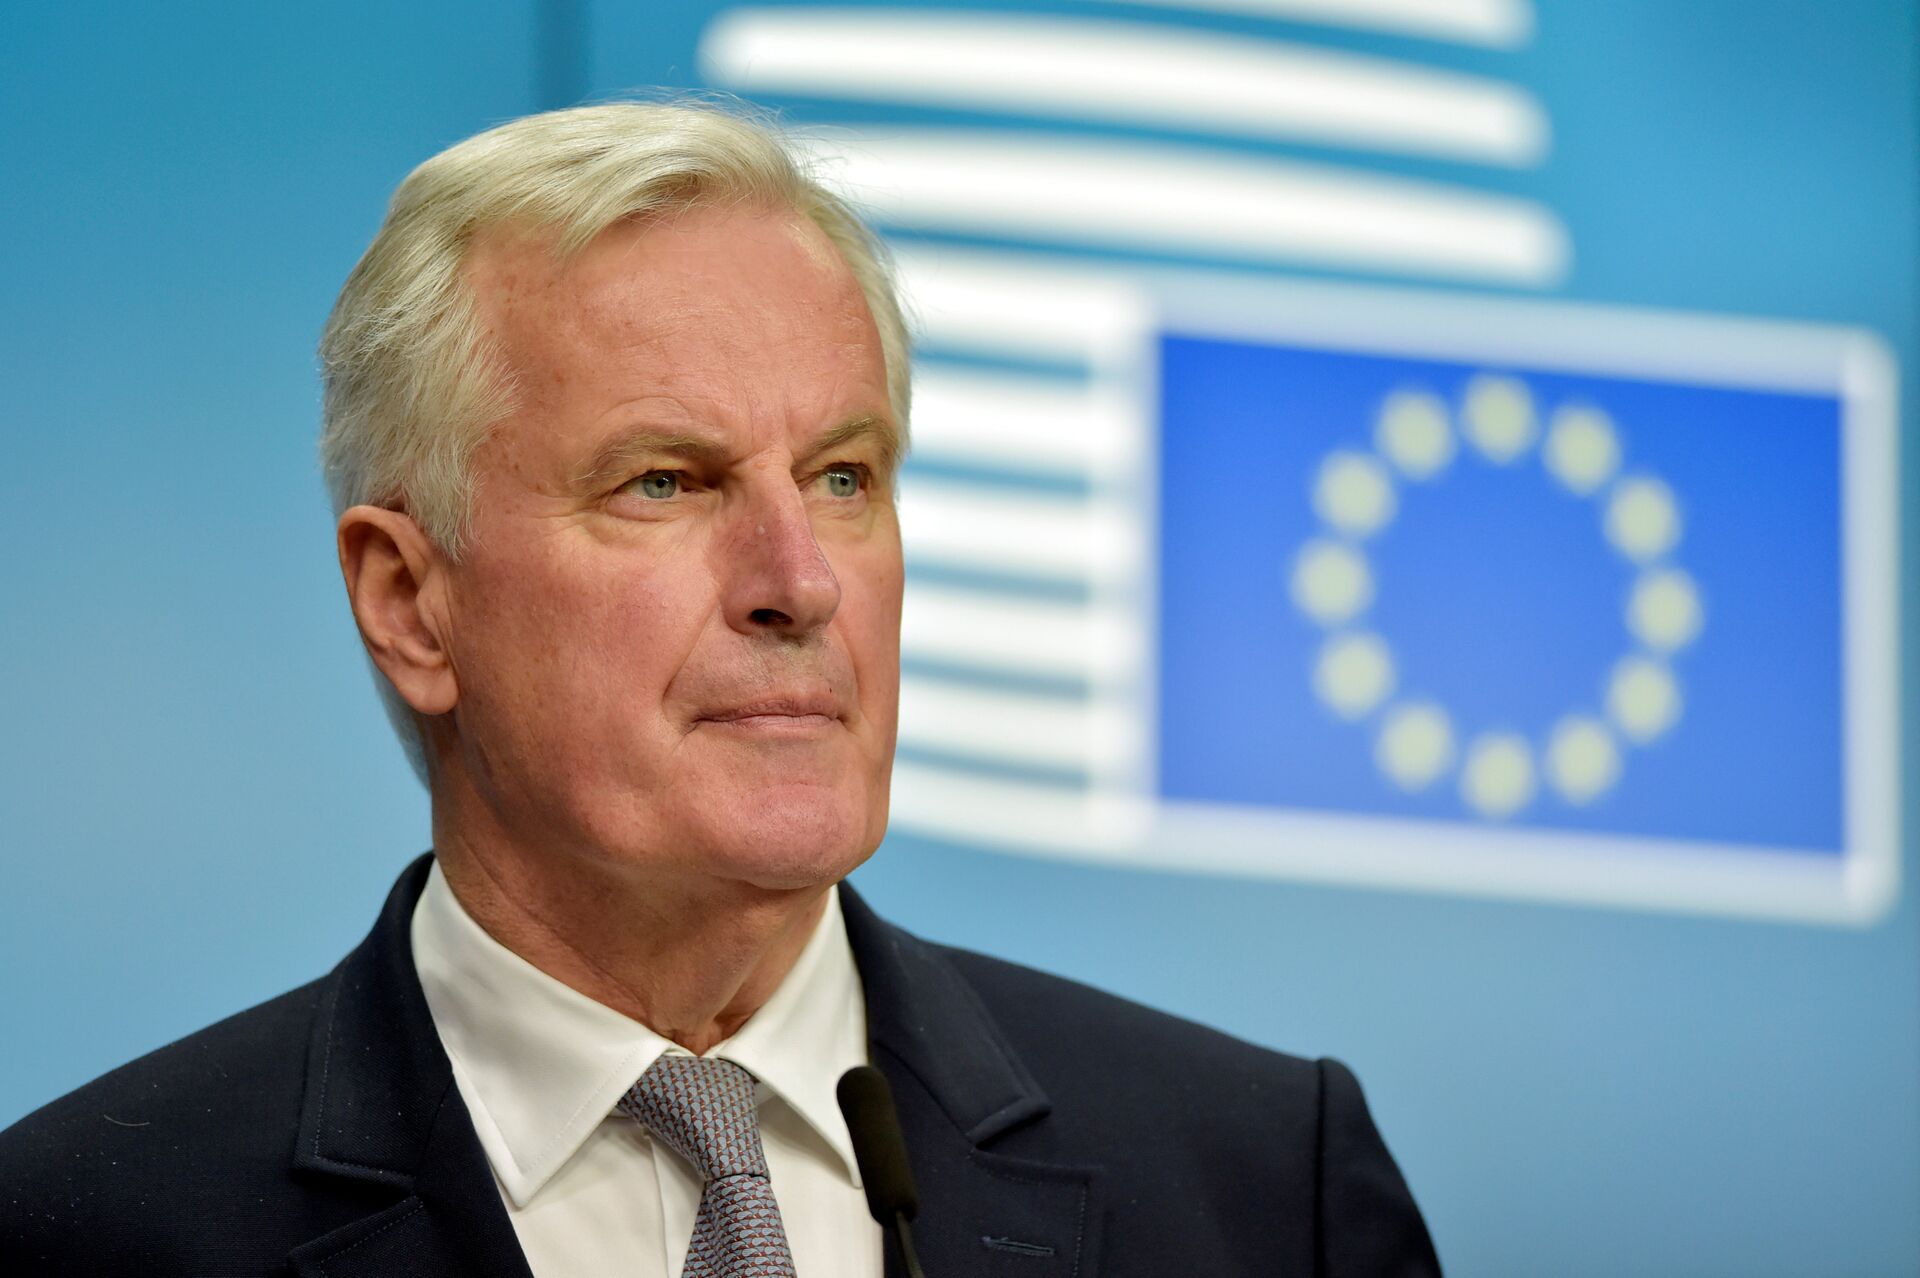 'Frexit' on Horizon? Ex-Brexit Chief Negotiator Barnier Reveals What May Prompt France to Leave EU - Sputnik International, 1920, 17.04.2021